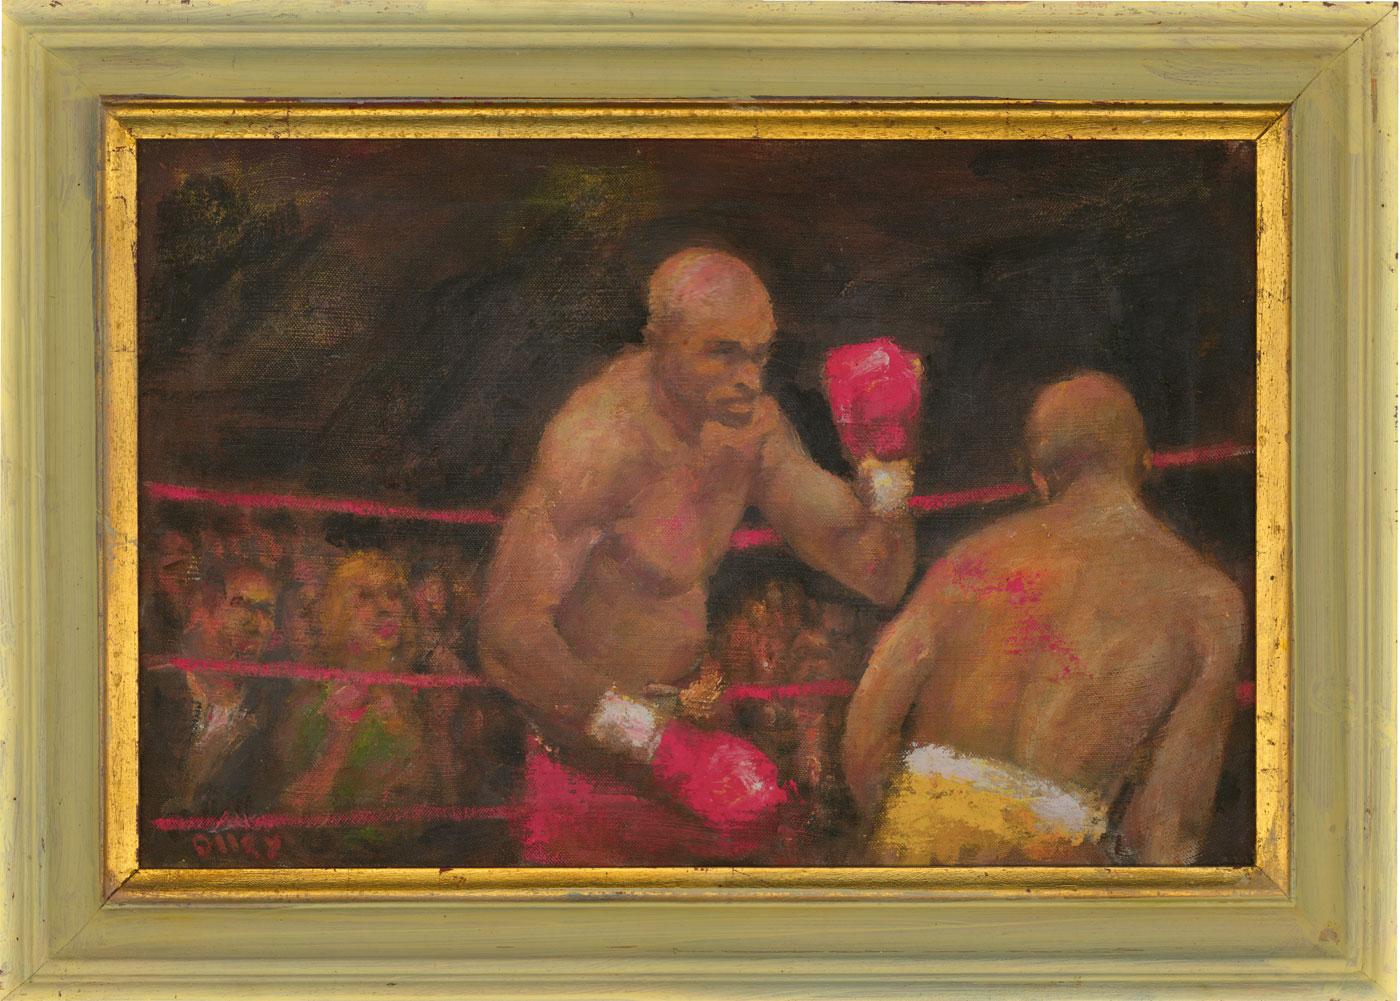 An extremely fine and engaging work by the British listed artist Ronald Olley (b.923), depicting a boxing match in the ring. Olley has chosen an intimate perspective, close to the action of the fighters within the ropes, and with a sea of spectators